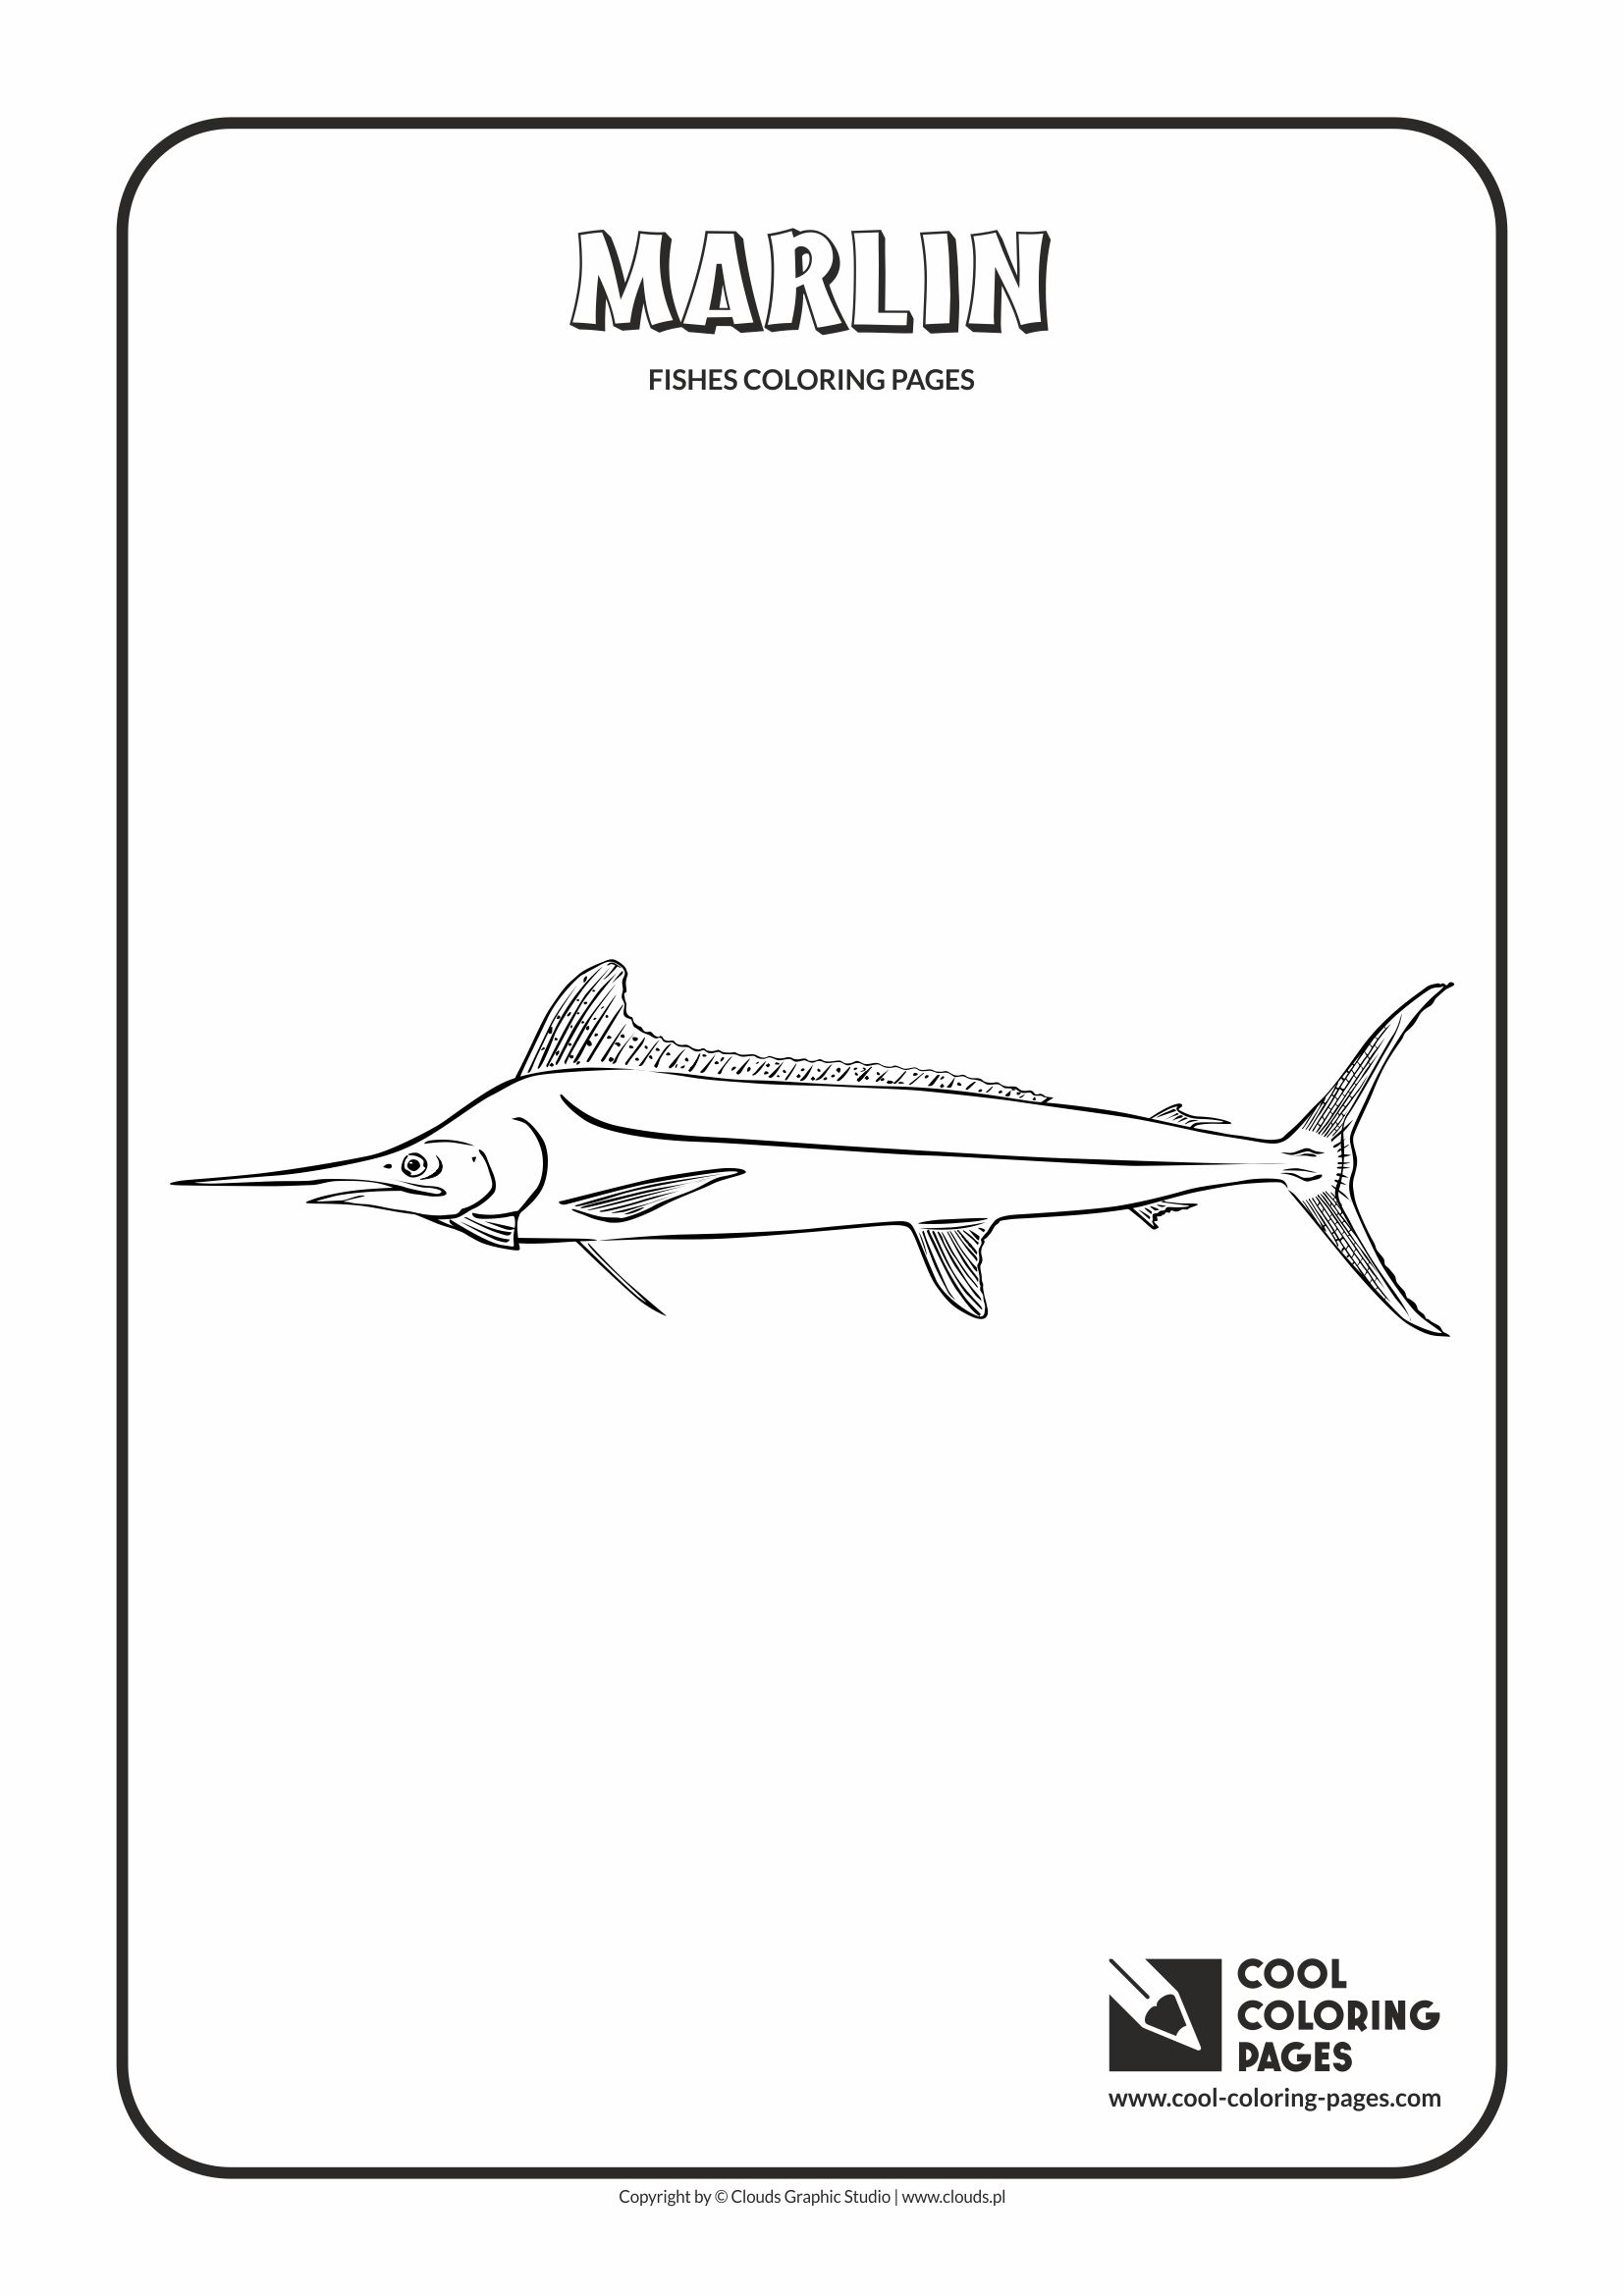 Cool Coloring Pages - Animals / Marlin / Coloring page with marlin